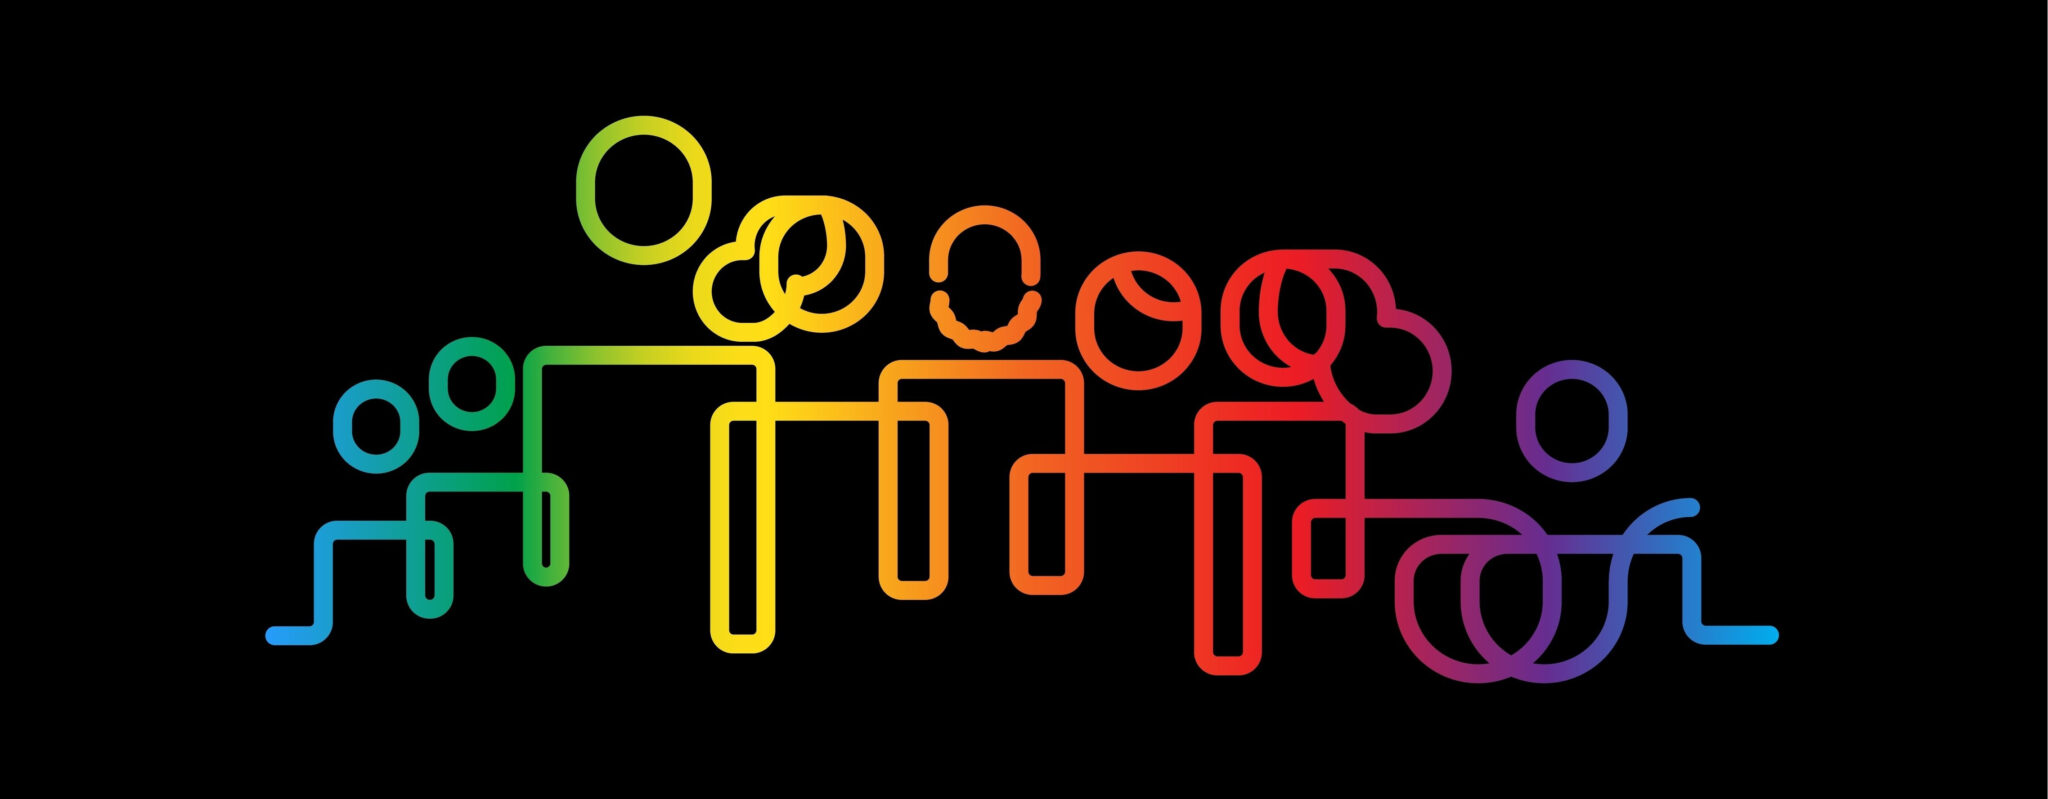 DEI graphic with a continuous line on a black background that changes colors and creates a rainbow design with different people shapes to represent diversity